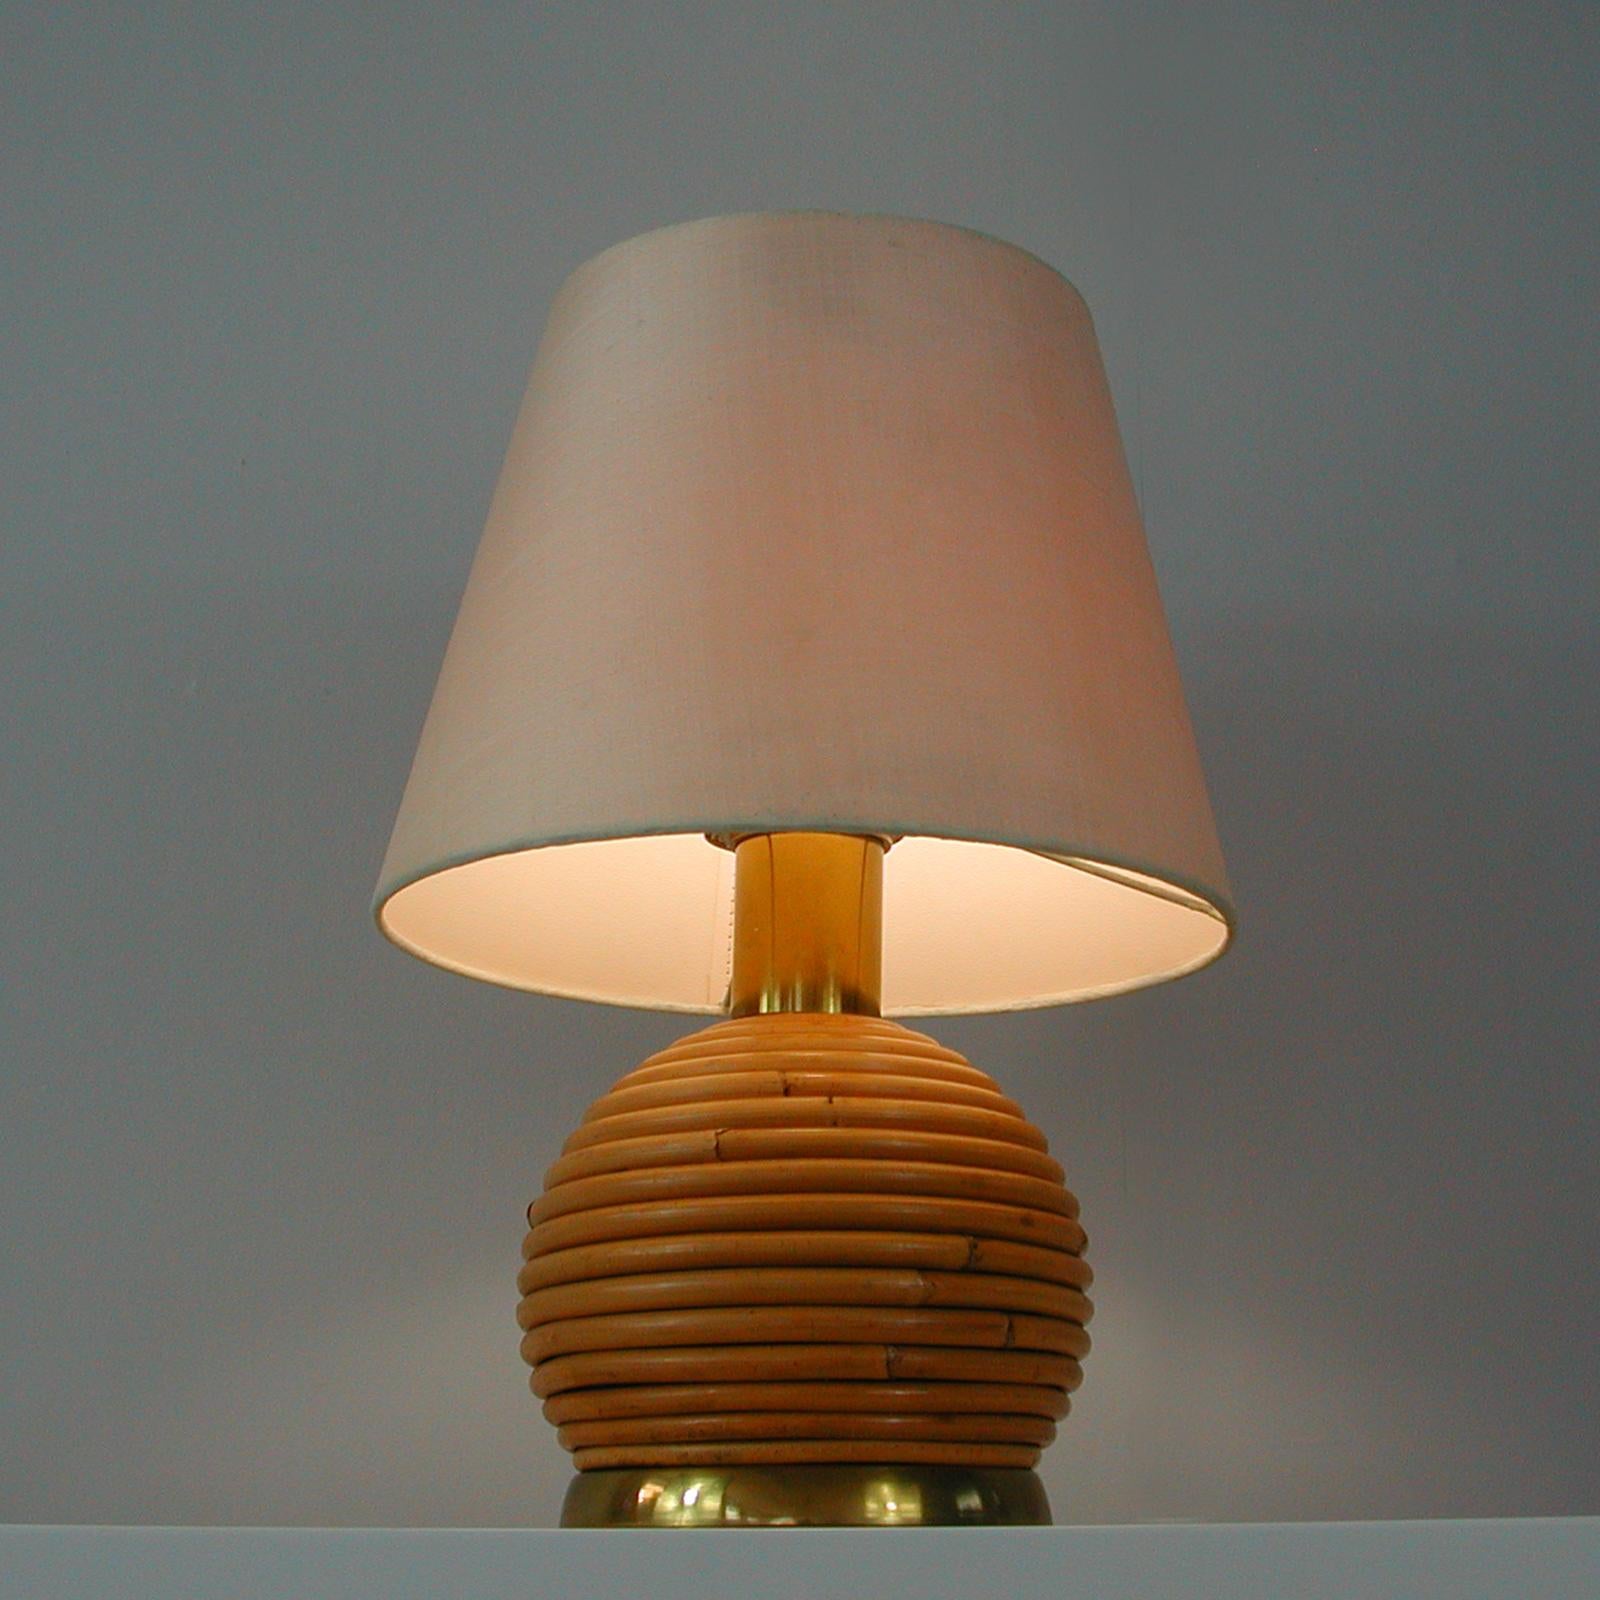 Mid-20th Century Swedish Midcentury Wicker and Brass Globe Table Lamp, 1960s For Sale